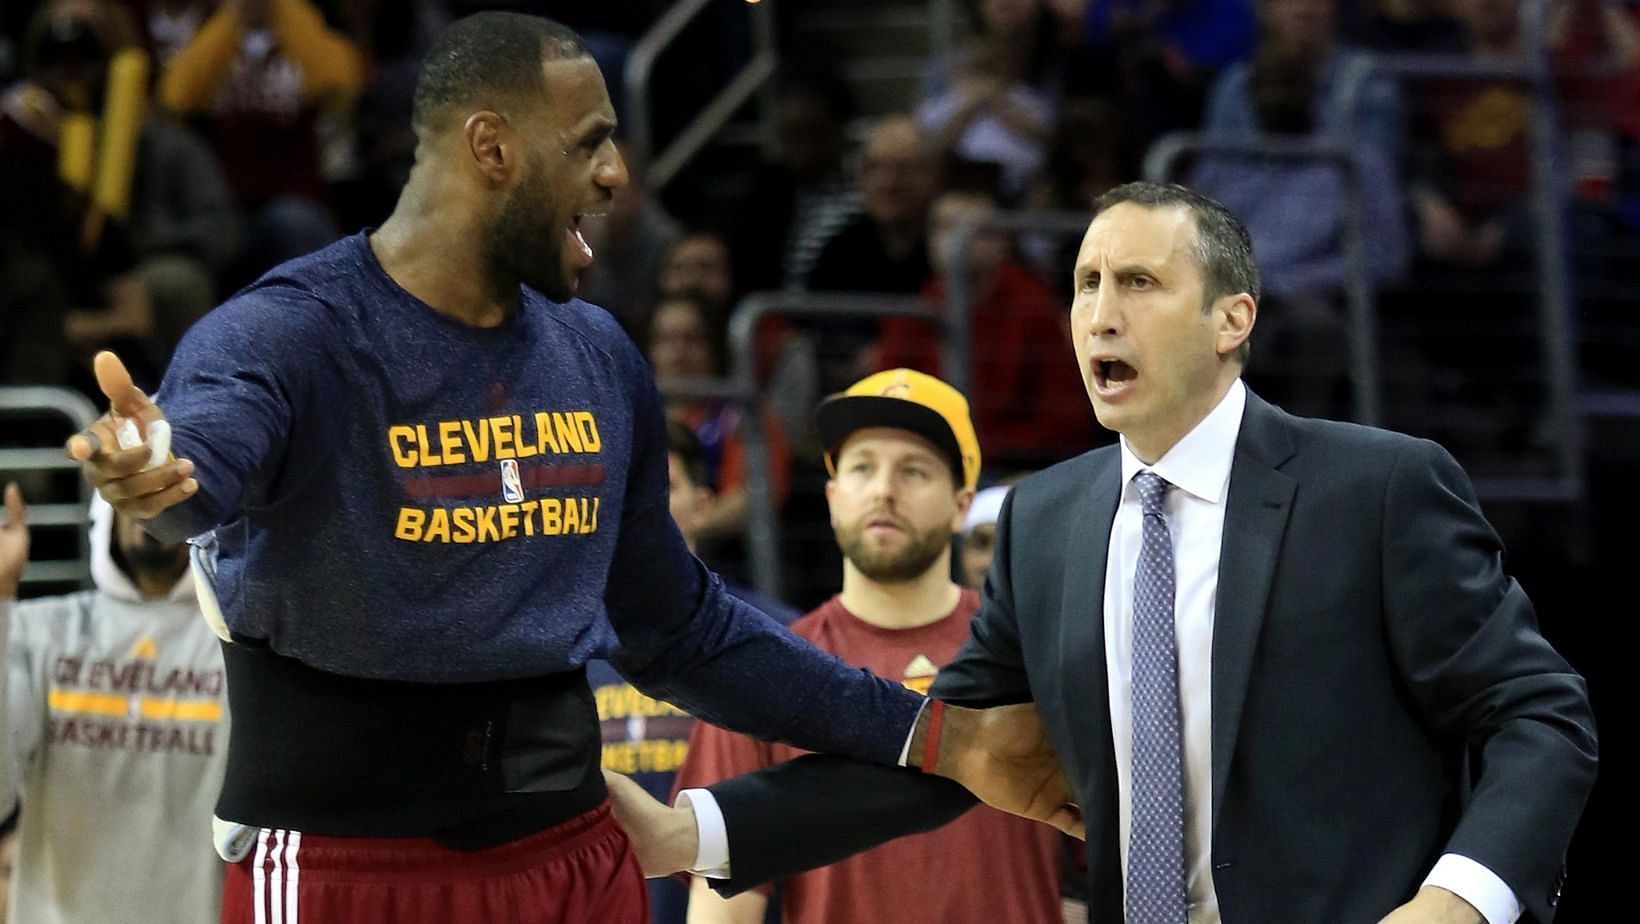 Based on various reports, LeBron James and former coach David Blatt were rarely on the same page during their time with the Cleveland Cavaliers.